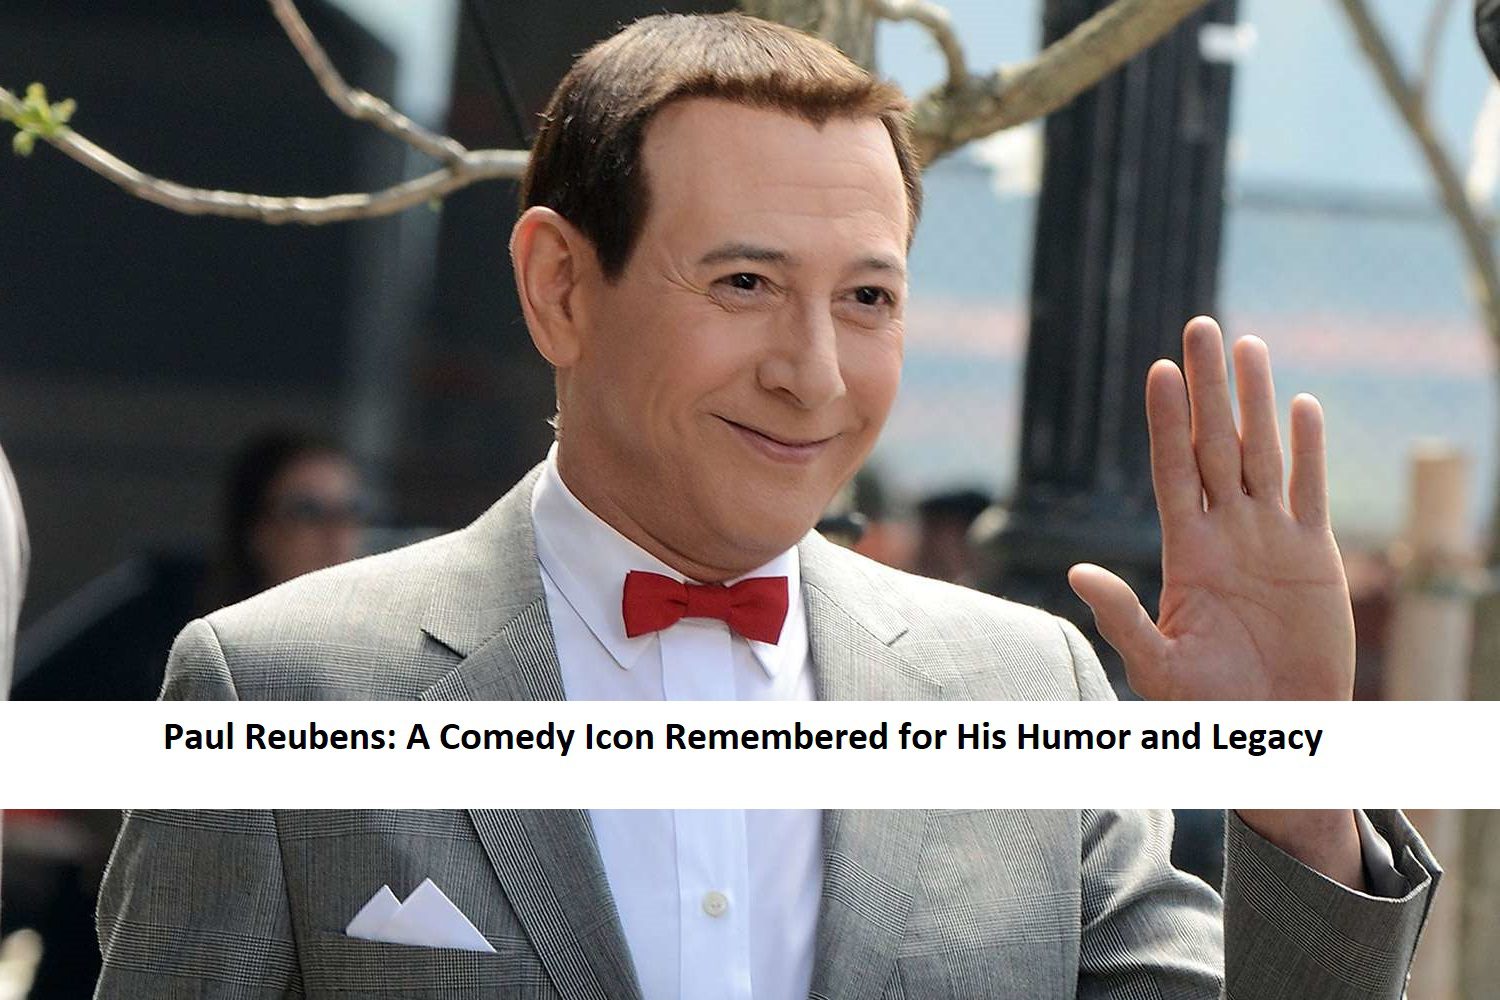 Paul Reubens A Comedy Icon Remembered for His Humor and Legacy